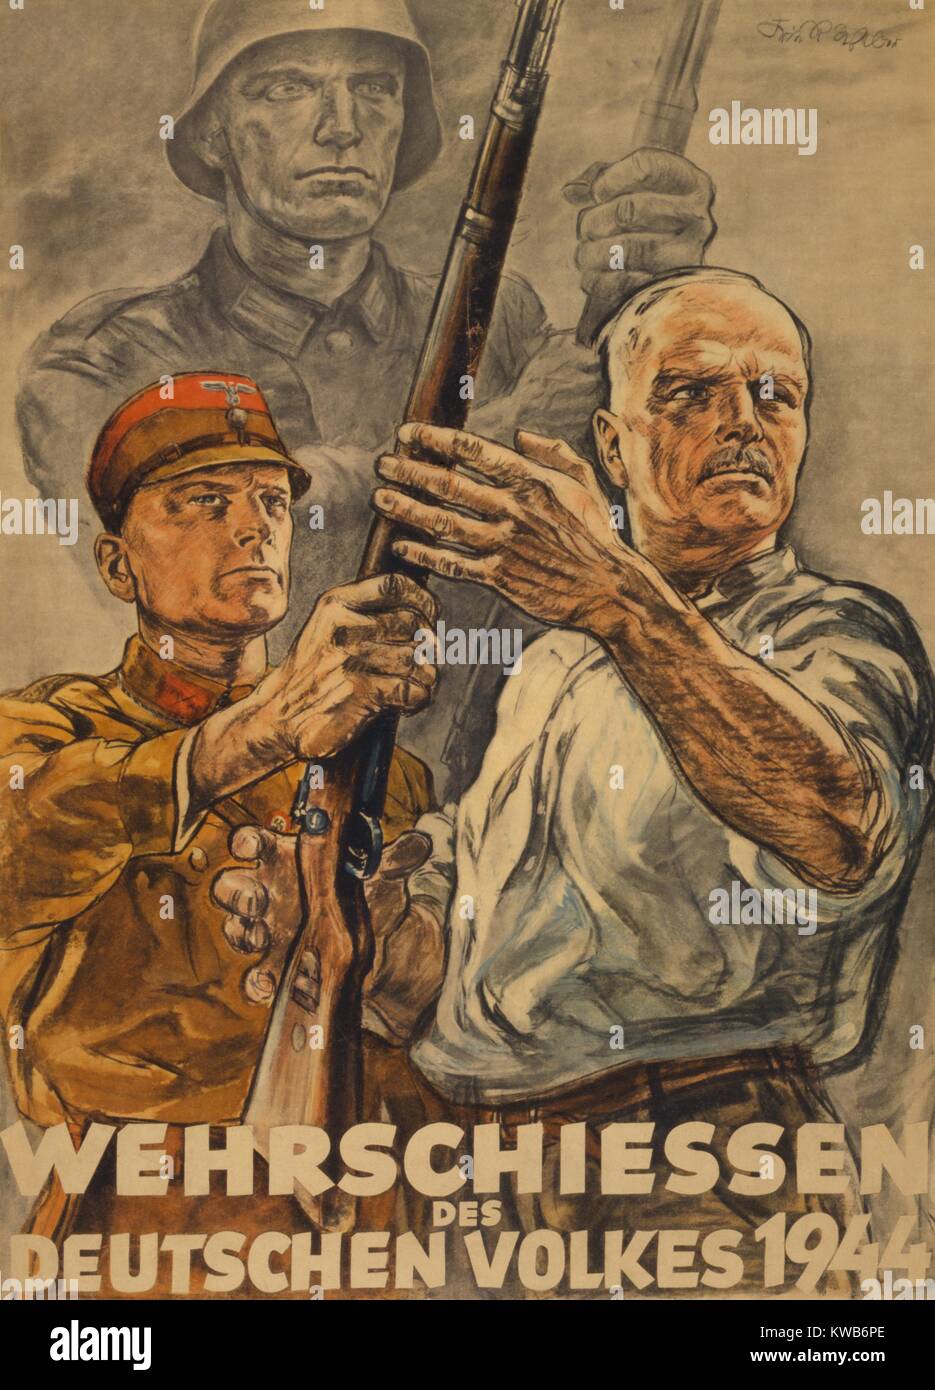 'Defense Shooting for the German People.' World War 2 poster for a civilian defense shooting contest. It depicts a soldier handing a middle-aged civilian a rifle. The poster appeals to German nationalism without mention of Nazi party or display of Swastika. 1944. (BSLOC 2014 8 223) Stock Photo